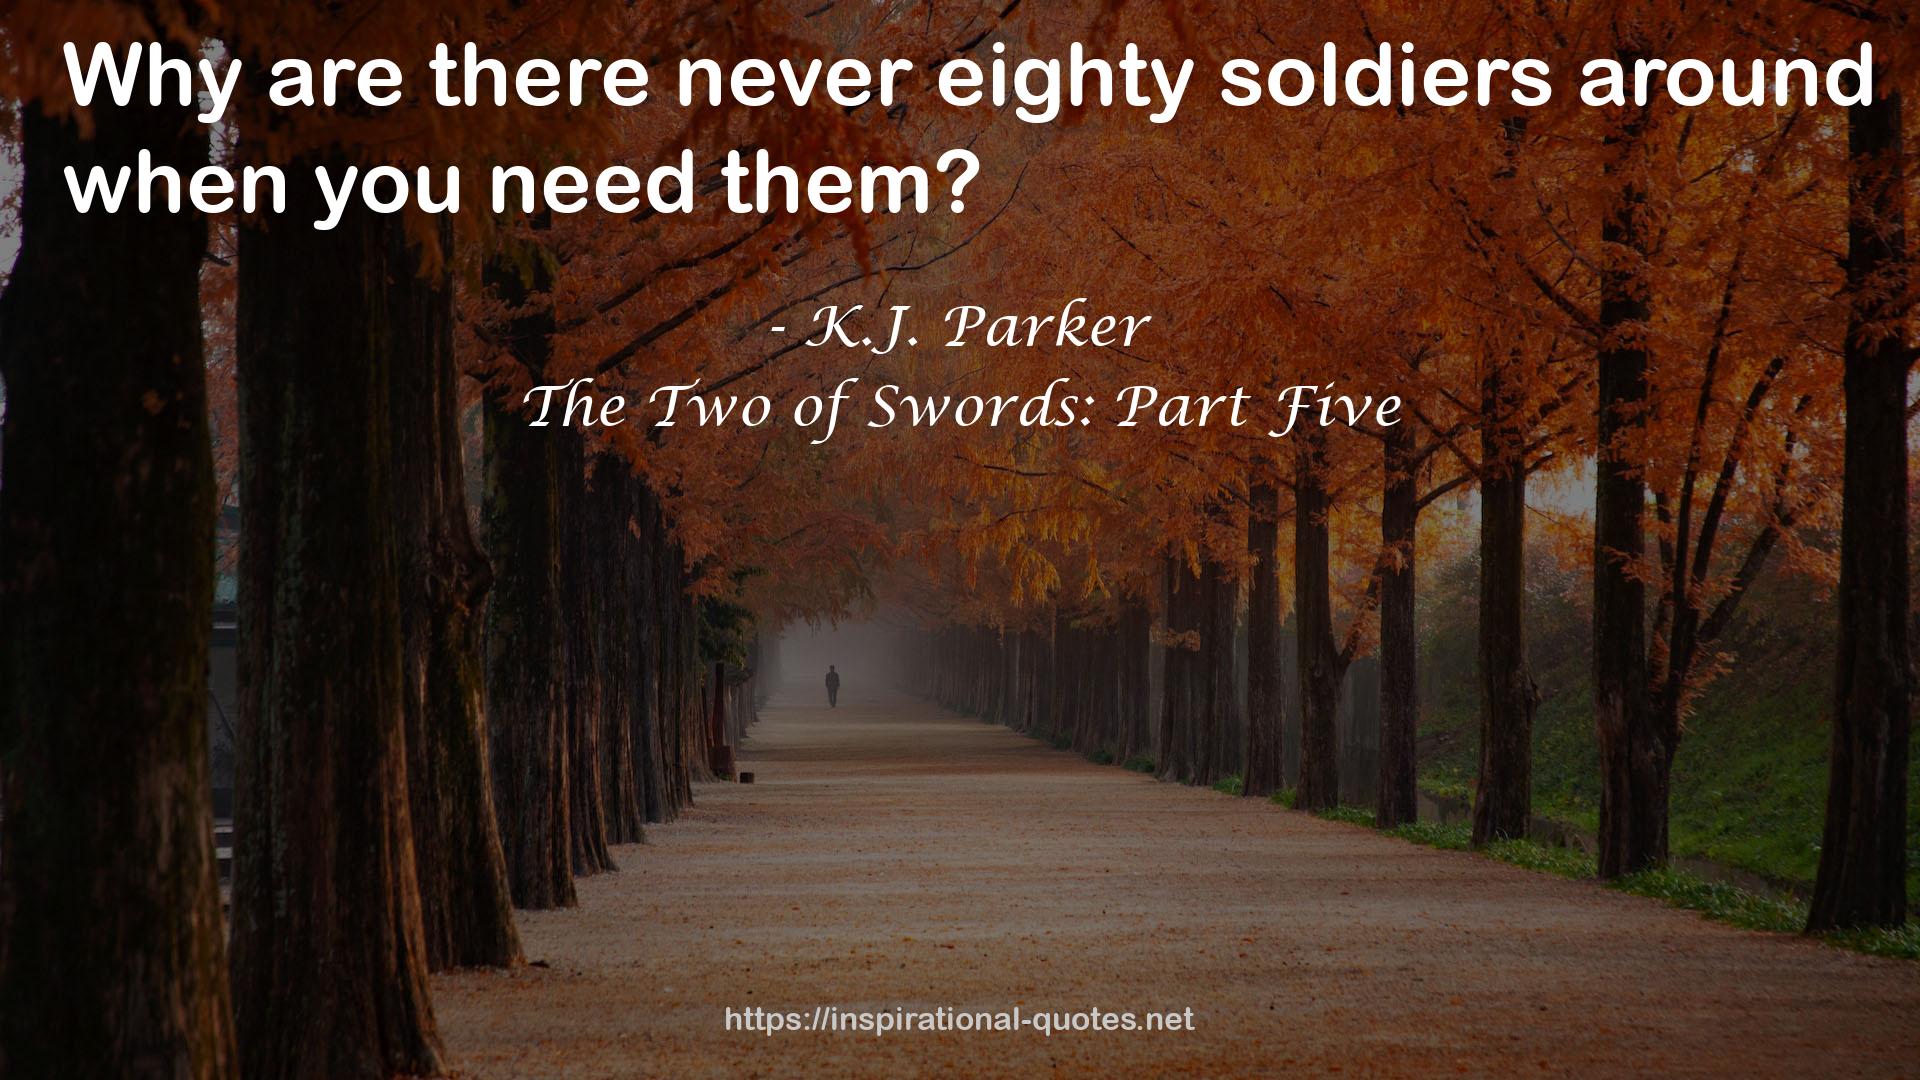 The Two of Swords: Part Five QUOTES